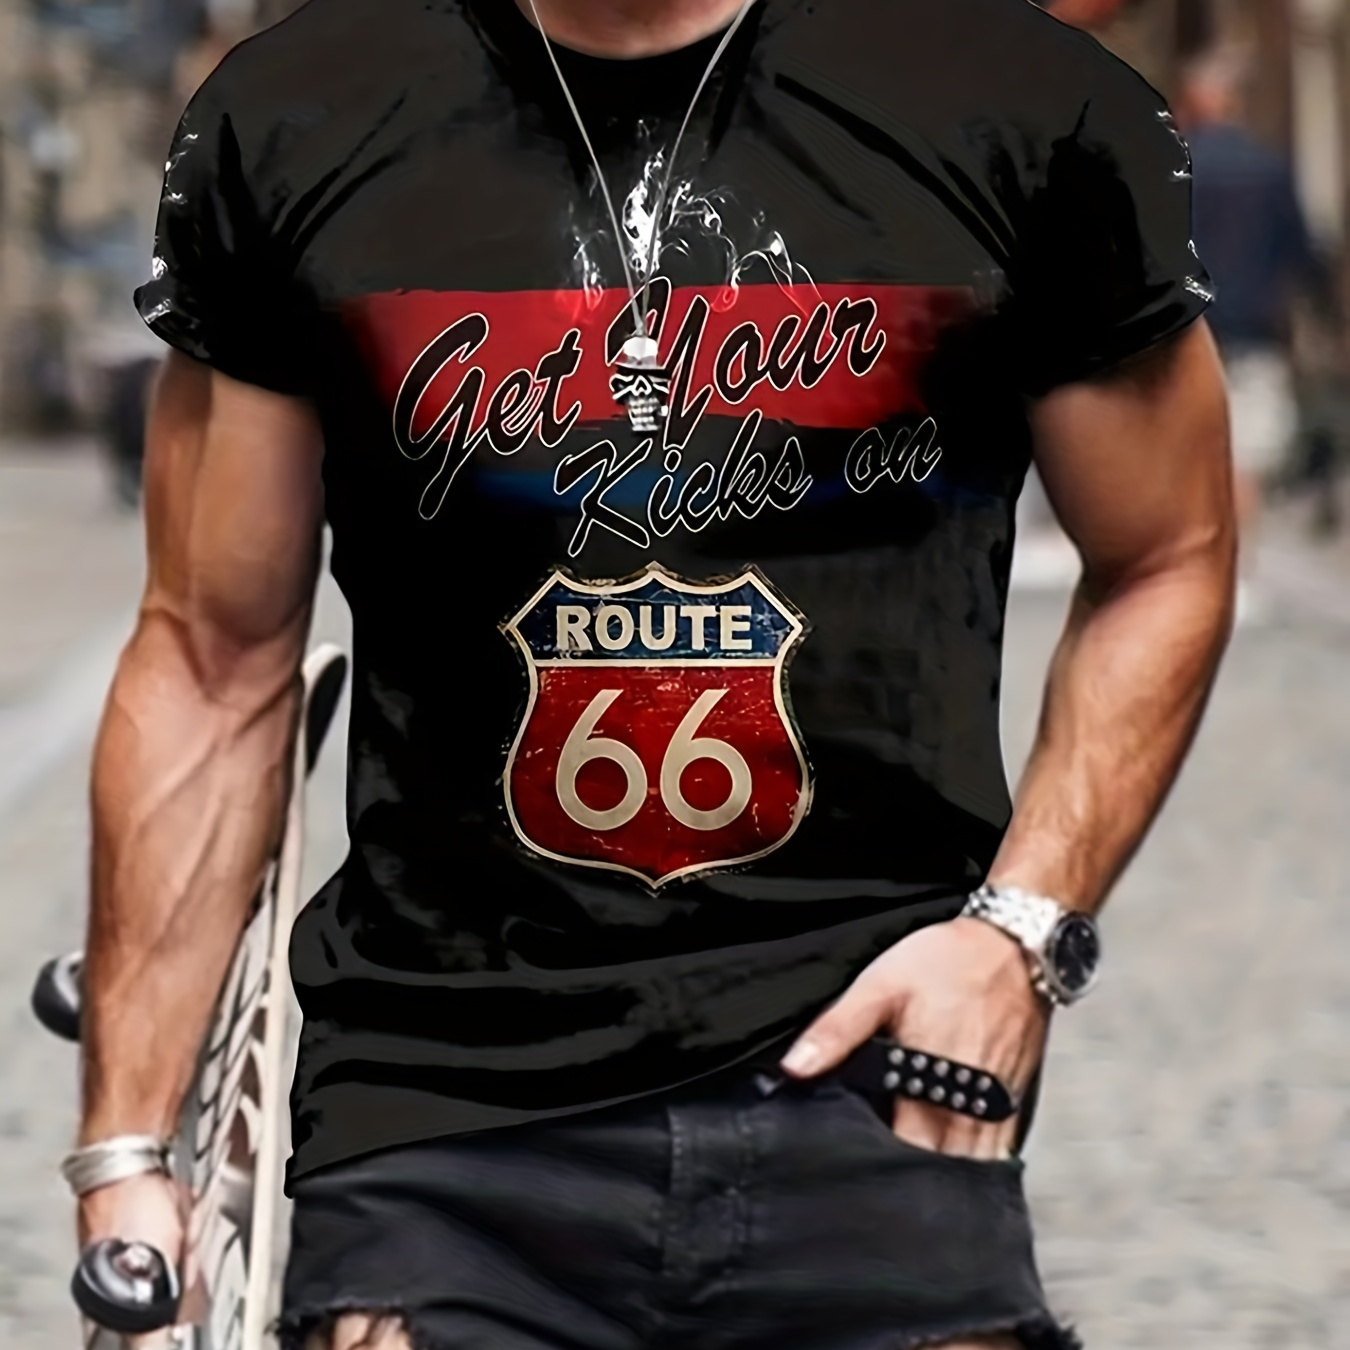 

Route 66 3d Digital Pattern Print Men's Graphic T-shirts, Causal Comfy Tees, Short Sleeve Pullover Tops, Men's Summer Outdoor Clothing